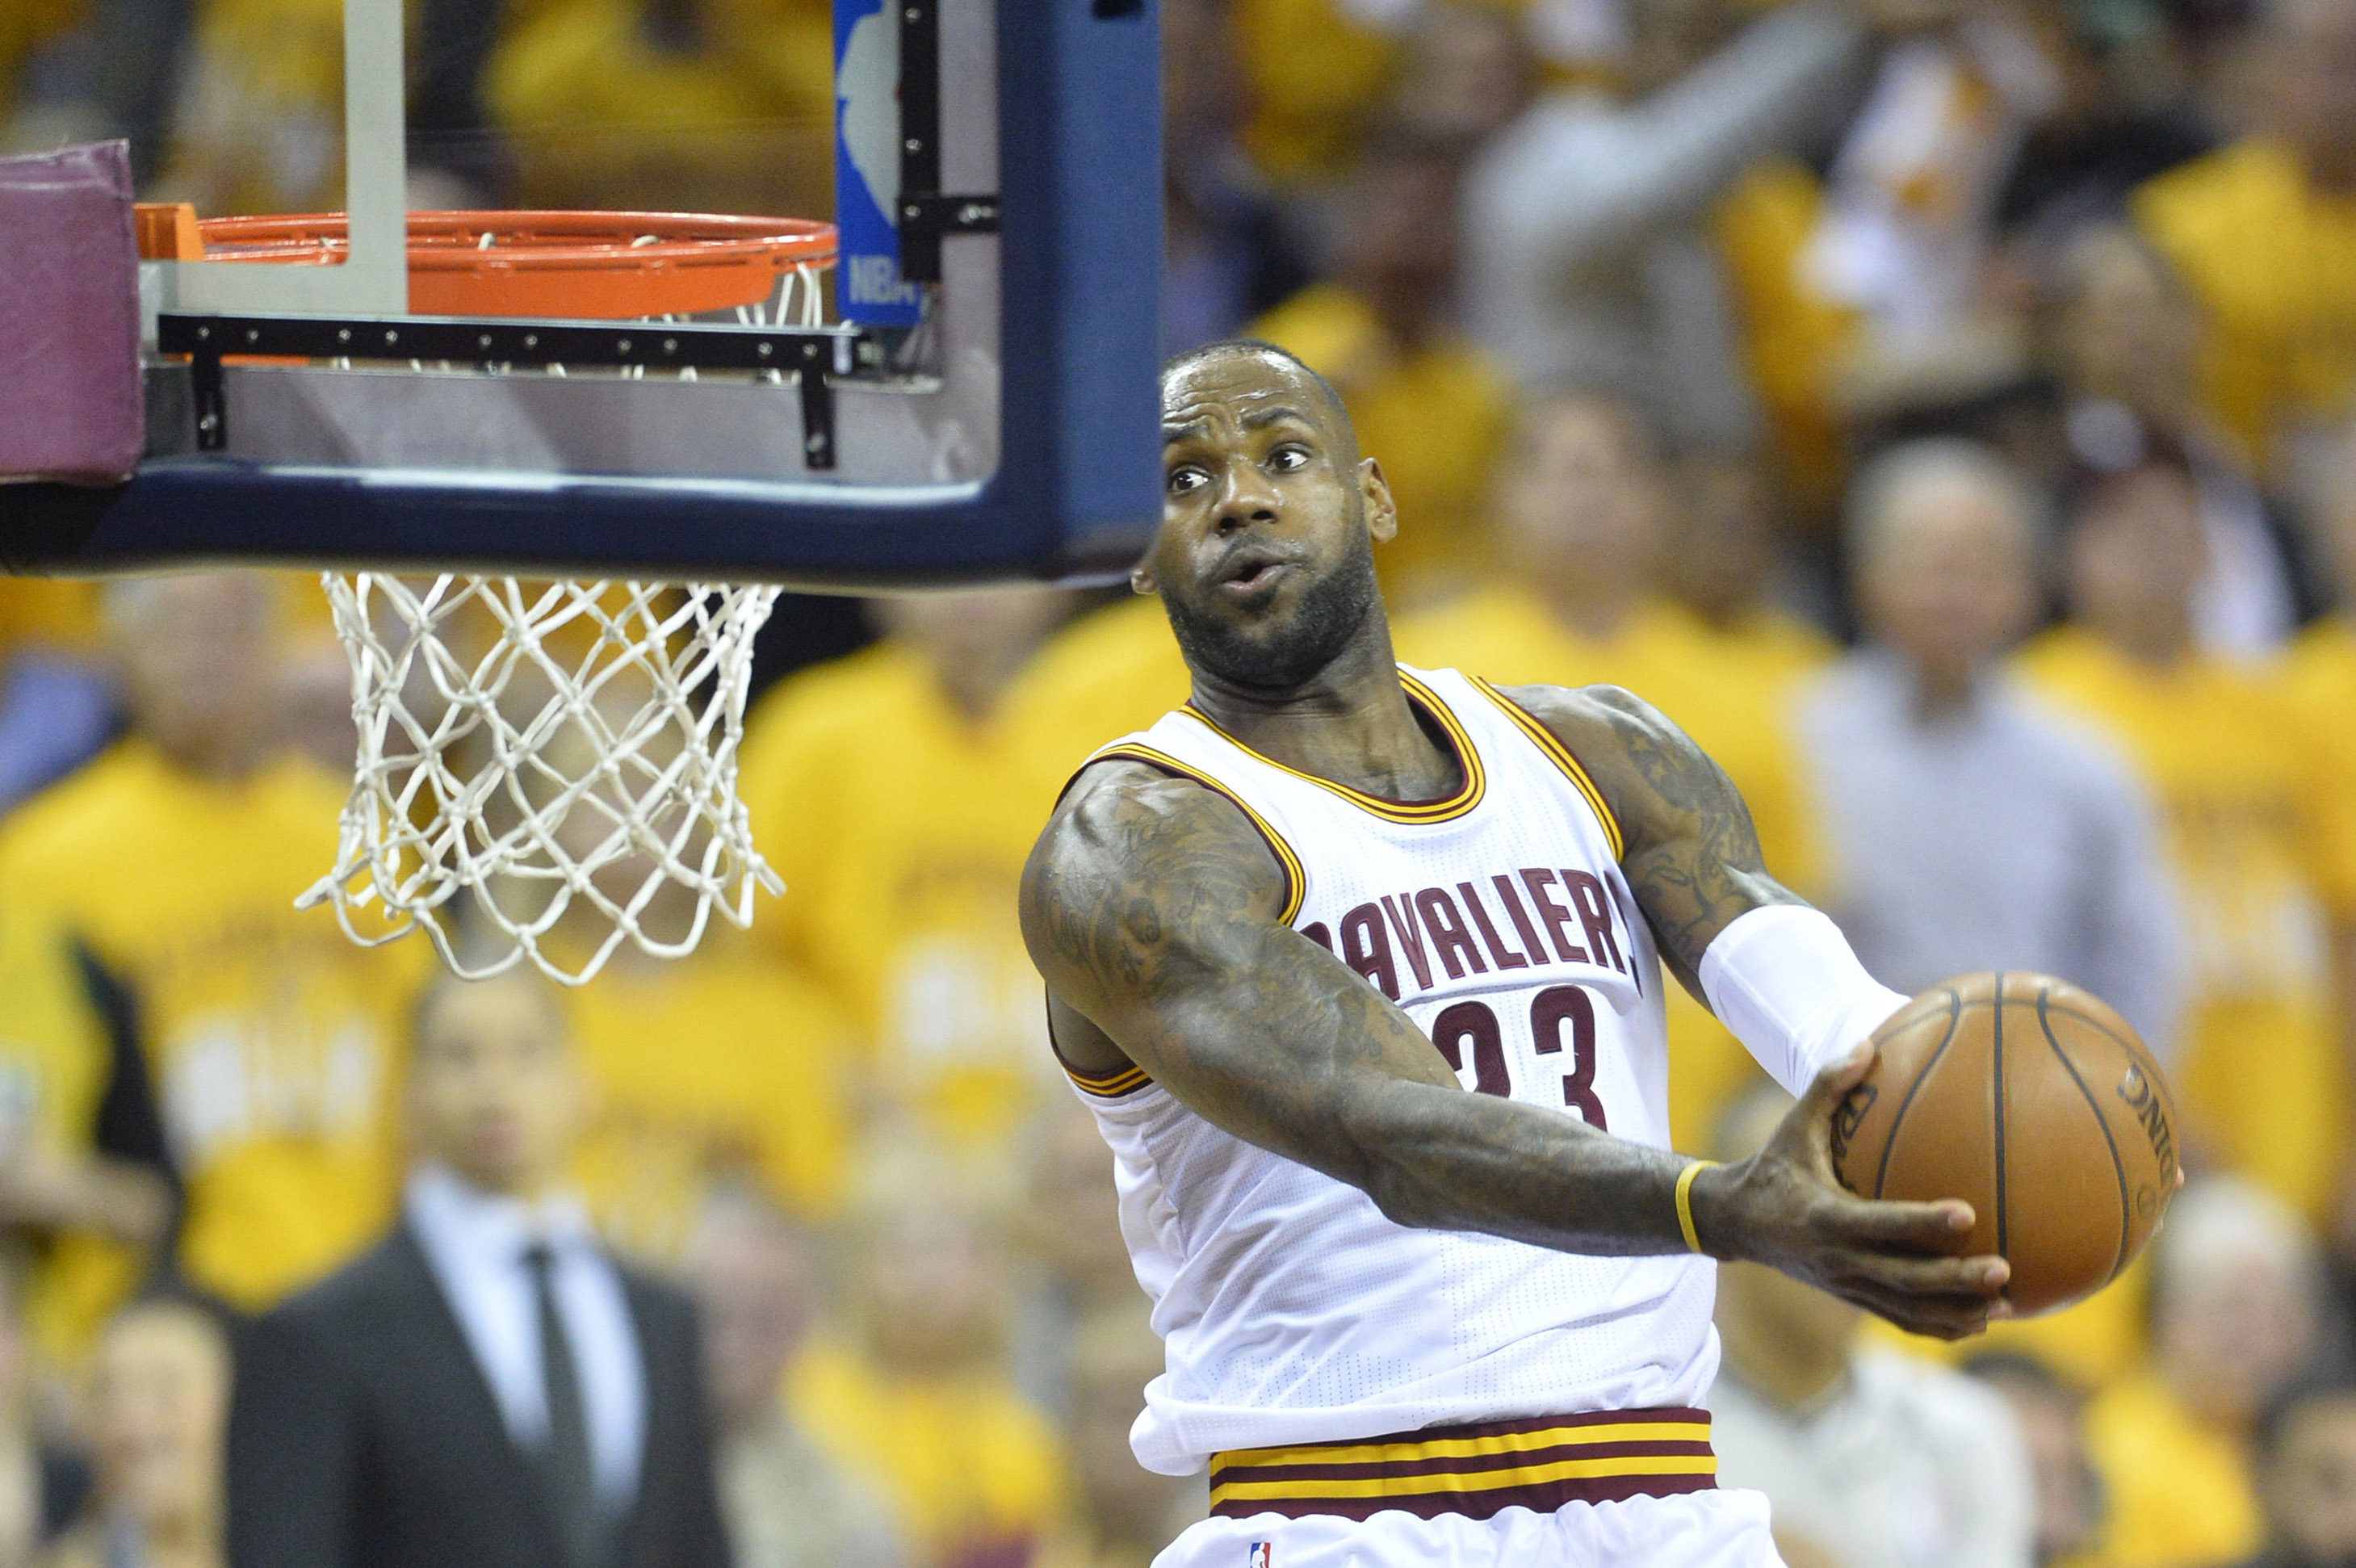 LeBron James goes sky high for two-handed reverse slam dunk | For The Win